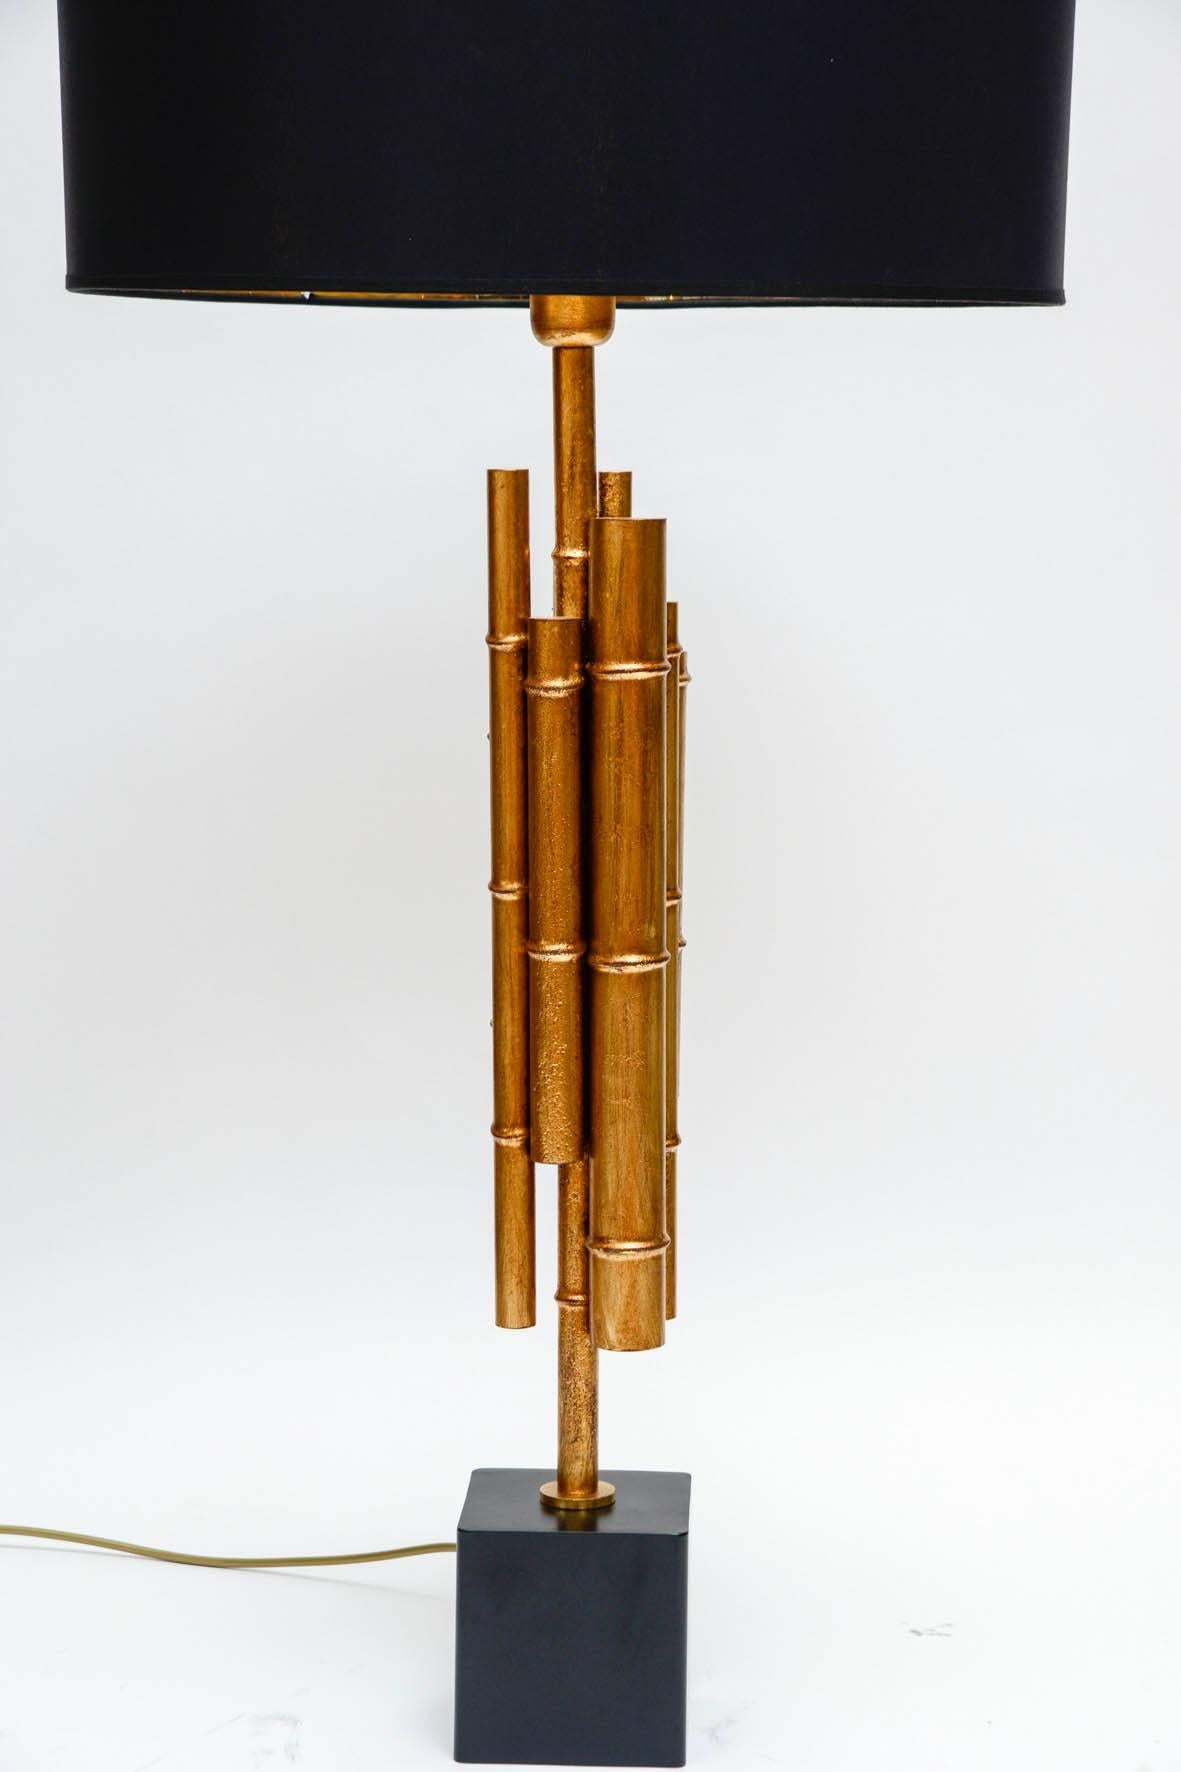 Pair of table lamps made of a black metal base and brass rods shaped like bamboo and painted.